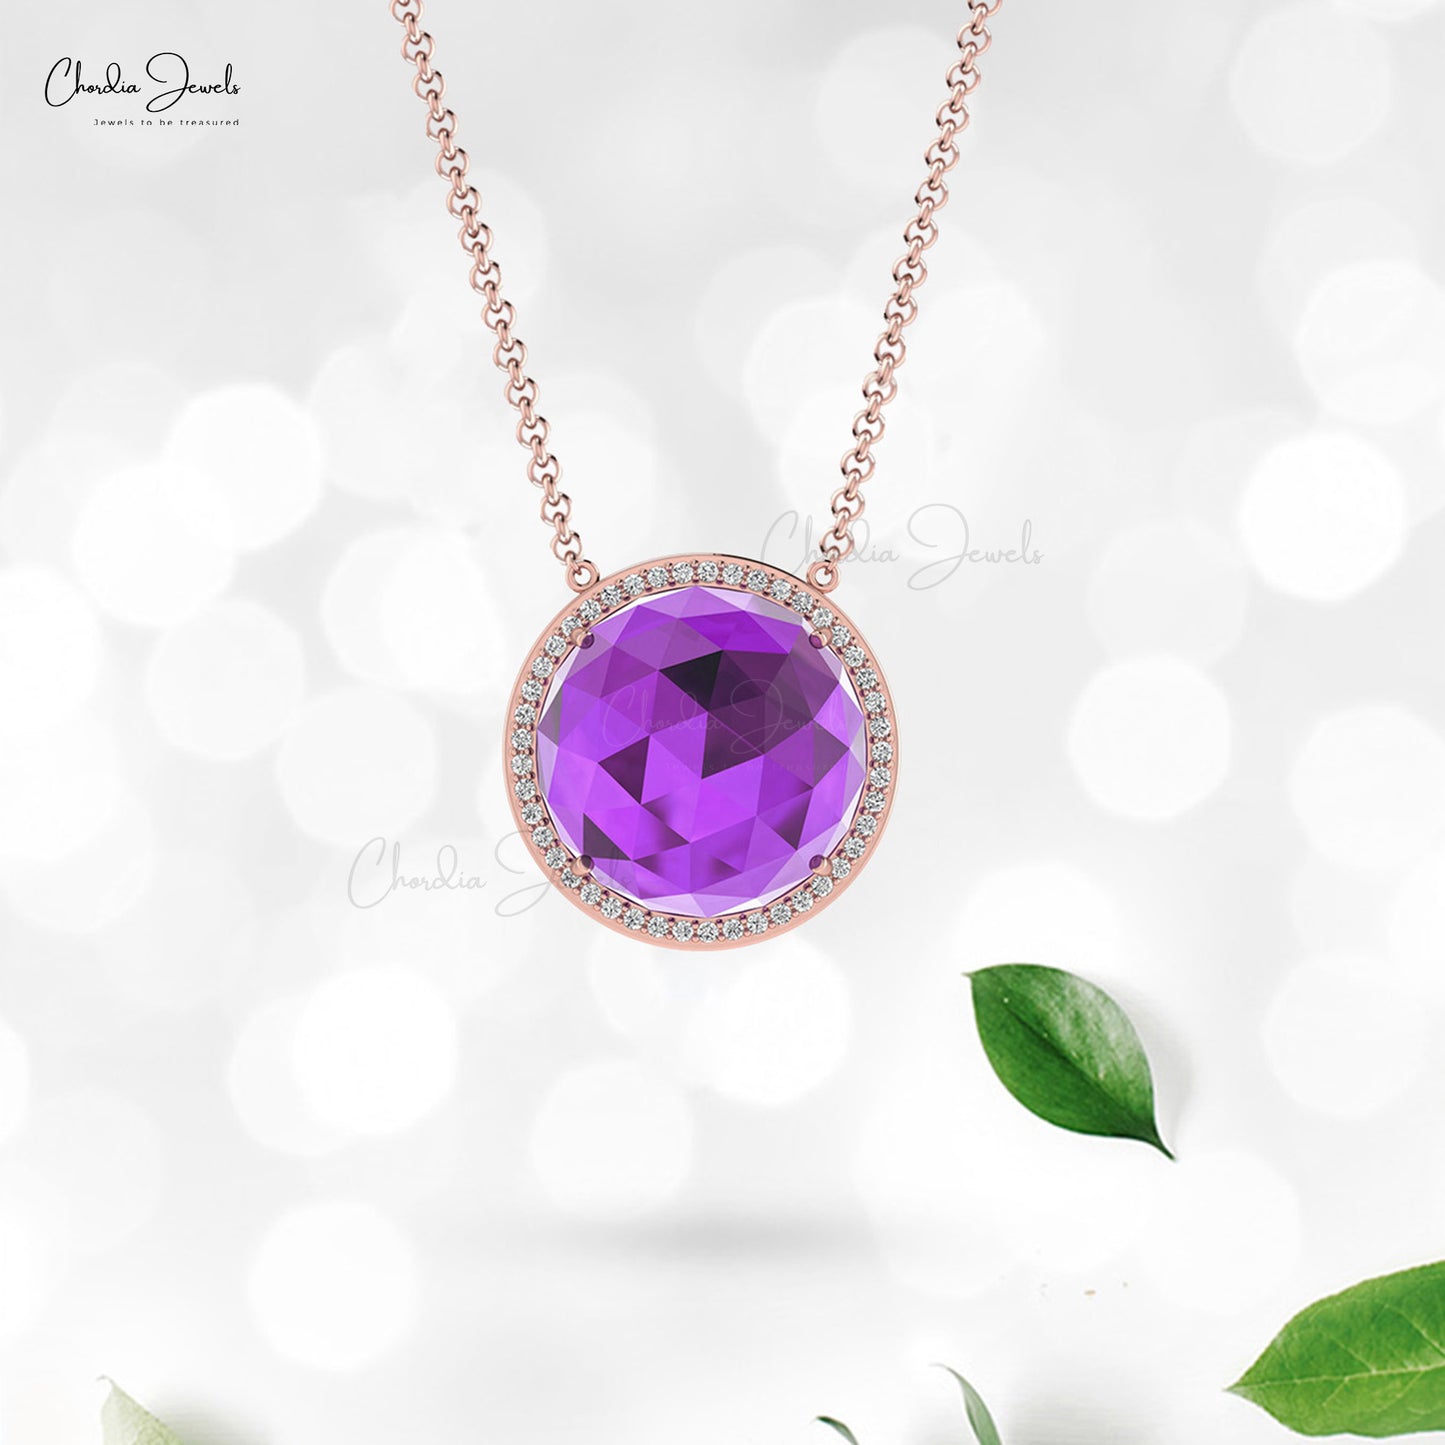 Genuine Amethyst and Diamond Necklace, 14k Solid Gold Gemstone Necklace, 15mm Round Rose Cut February Birthstone Necklace Gift for Anniversary